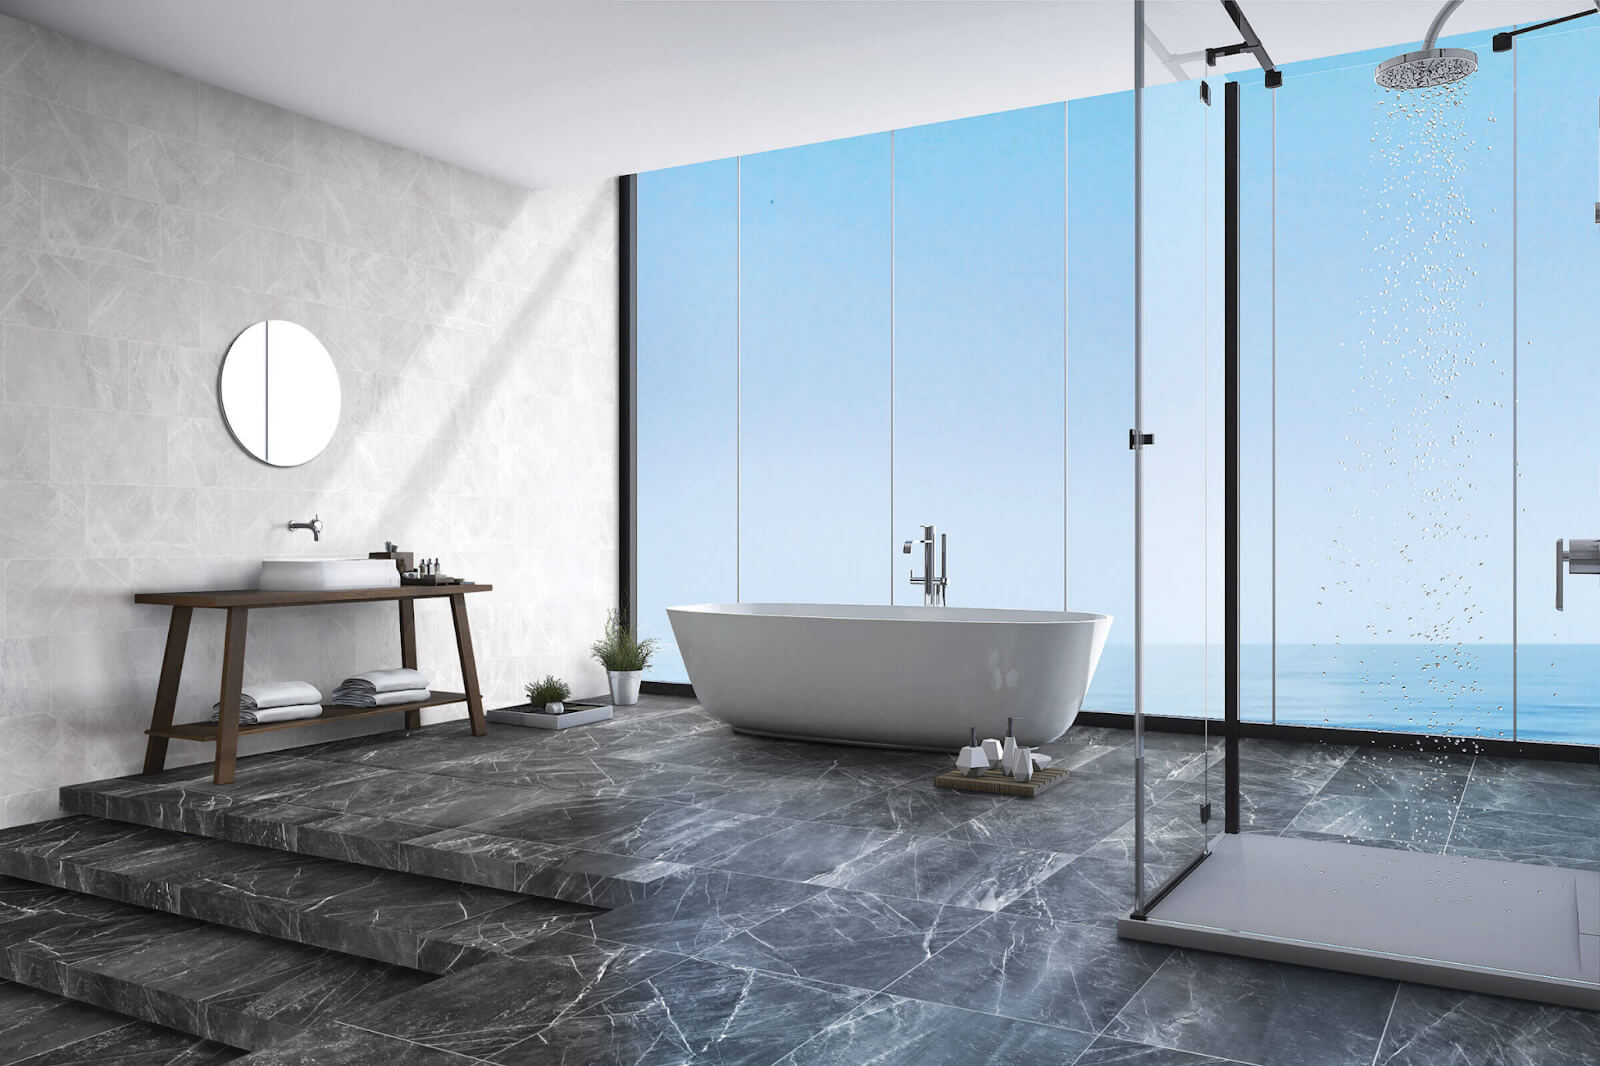 Why we should most prefer Ceramic Tile than other materials